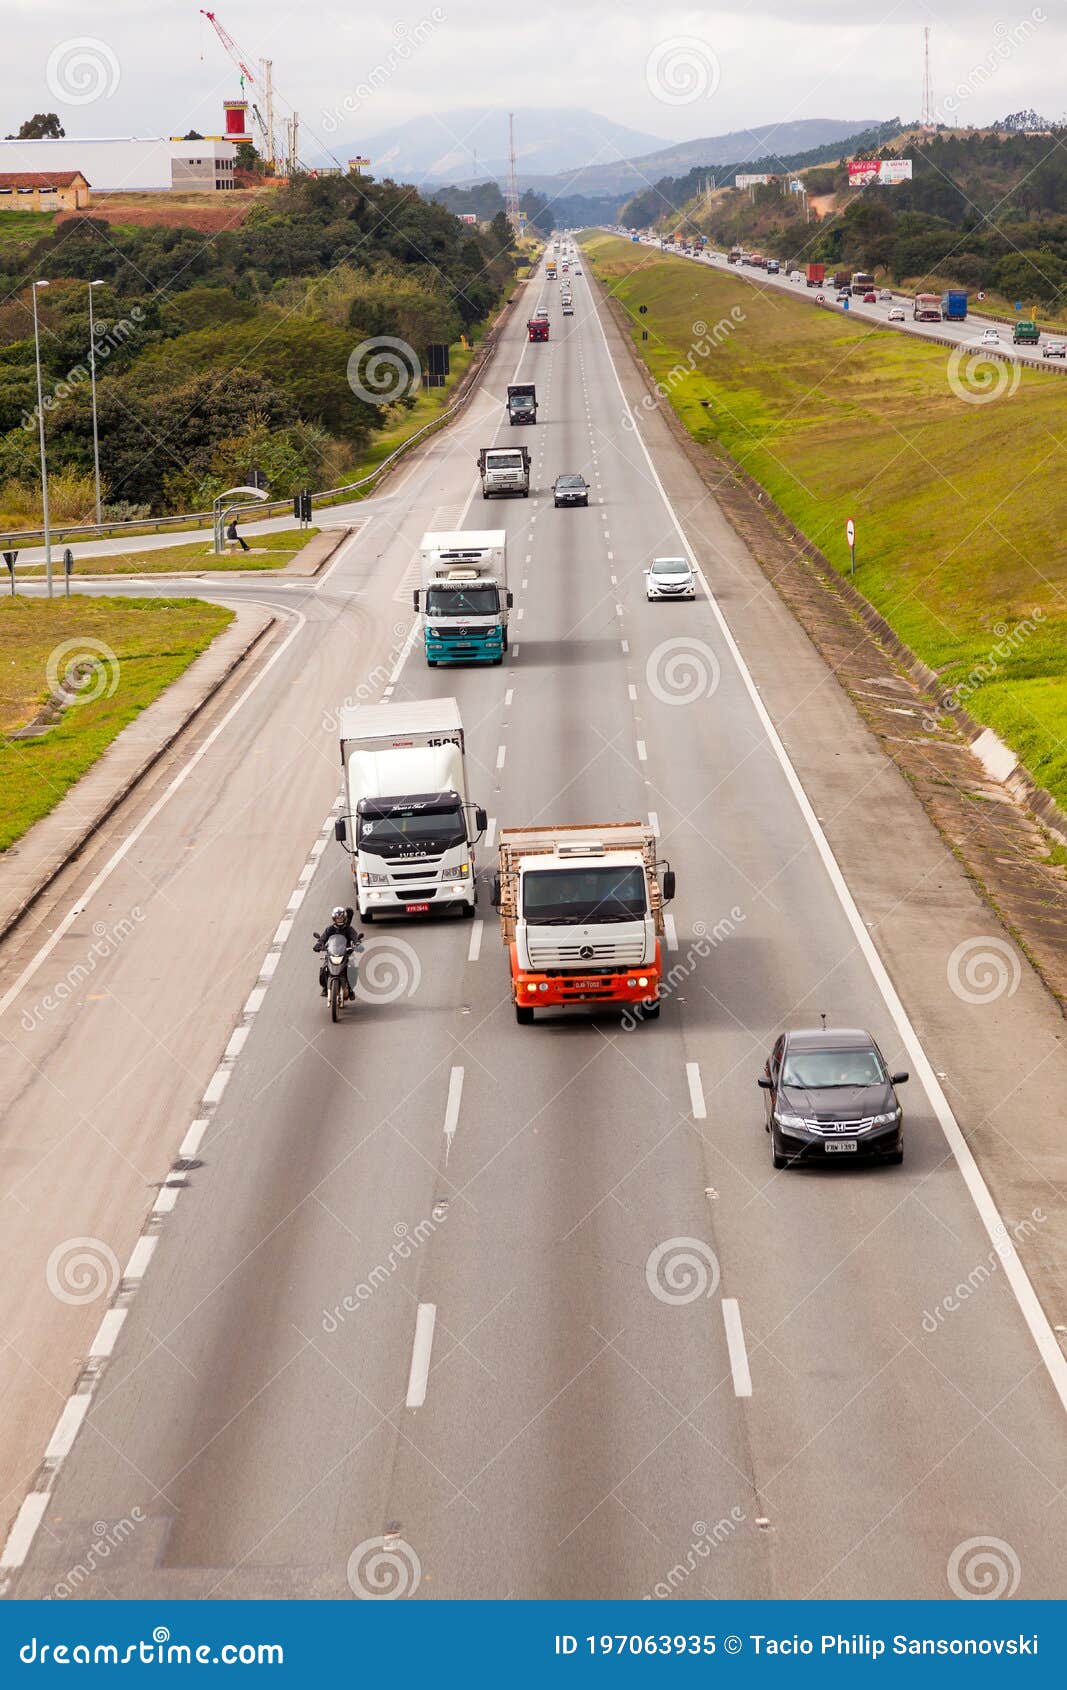 vehicles on br-374 highway with headlights on during the daylight obeying the new brazilian